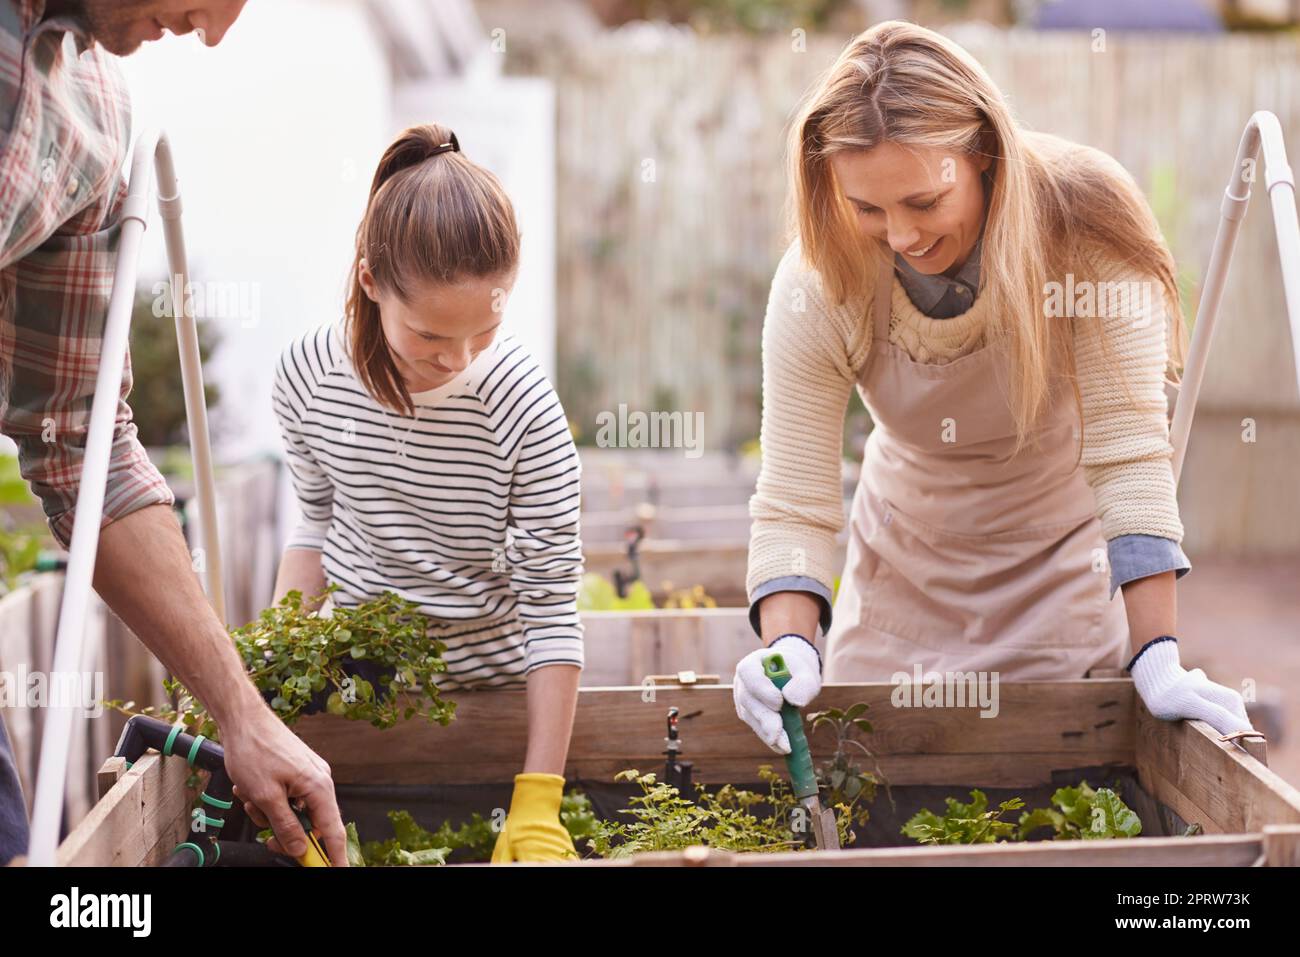 Teaching green living. a family gardening together in their backyard. Stock Photo